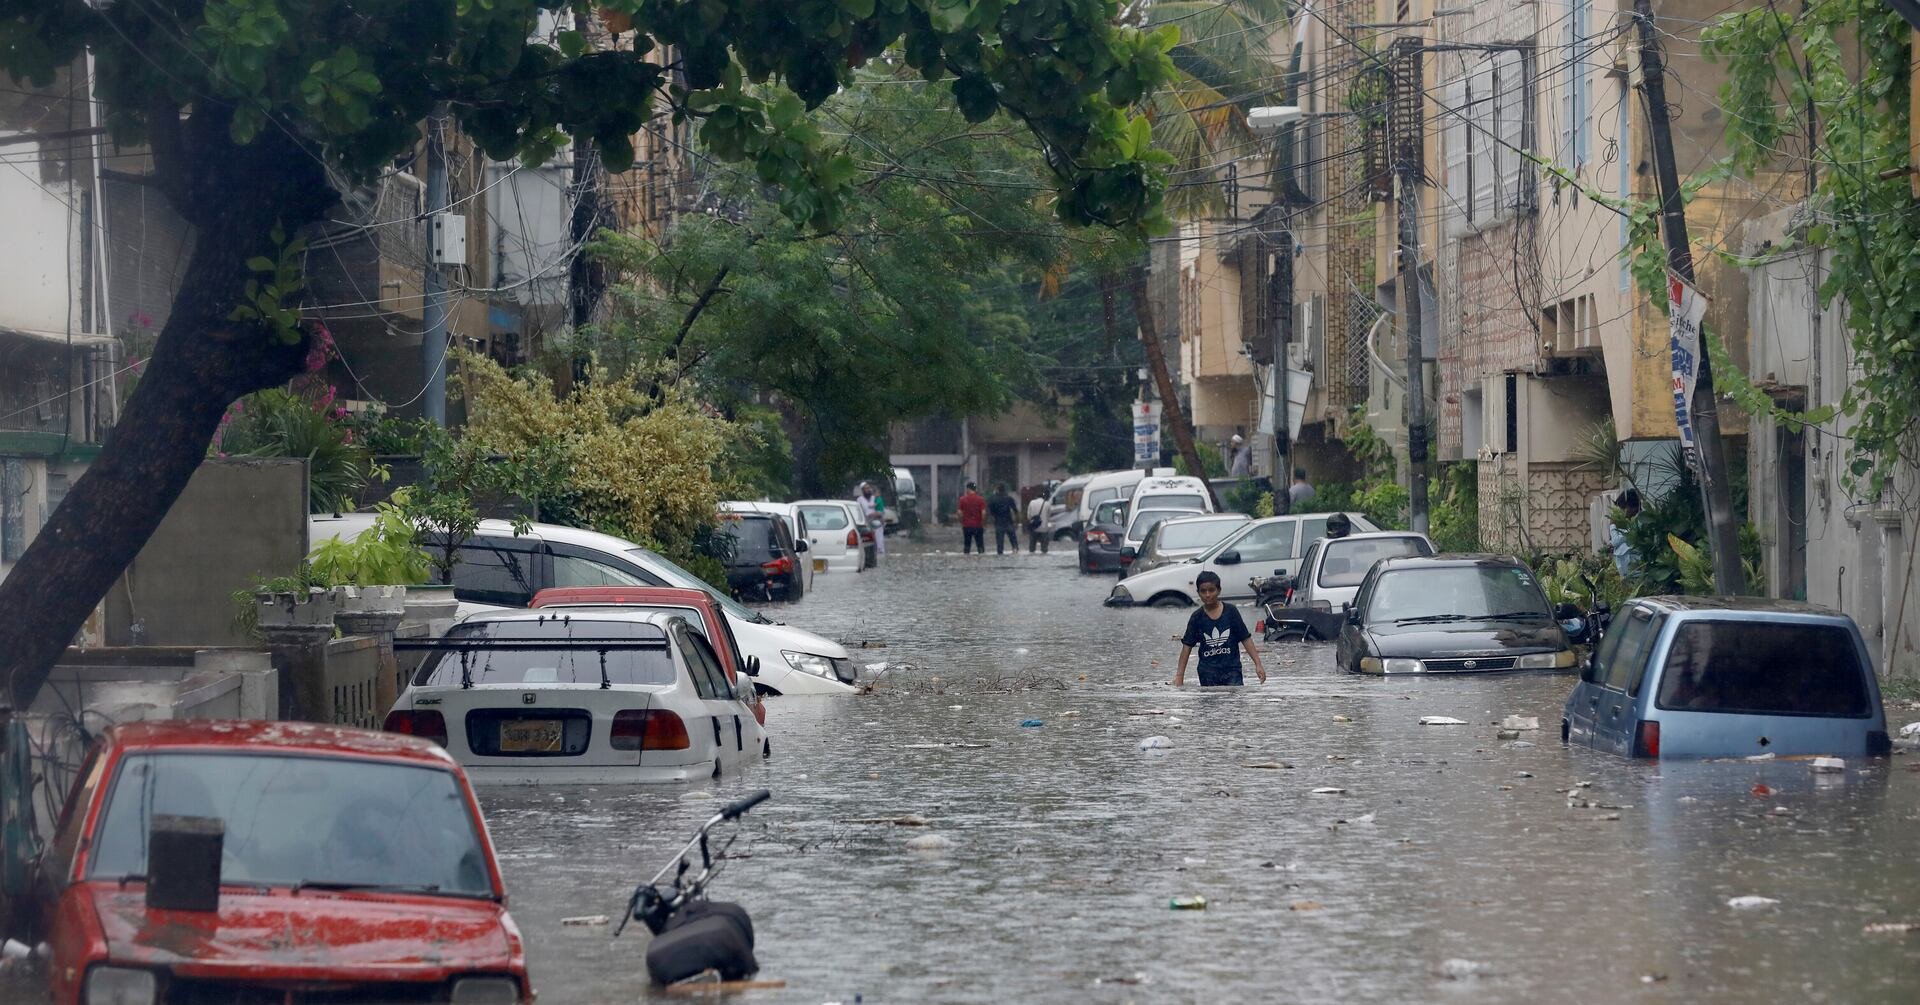 a boy wades through a flooded street with submerged vehicles during the monsoon rain as the outbreak of the coronavirus disease covid 19 continues in karachi pakistan august 25 2020 reuters akhtar soomro